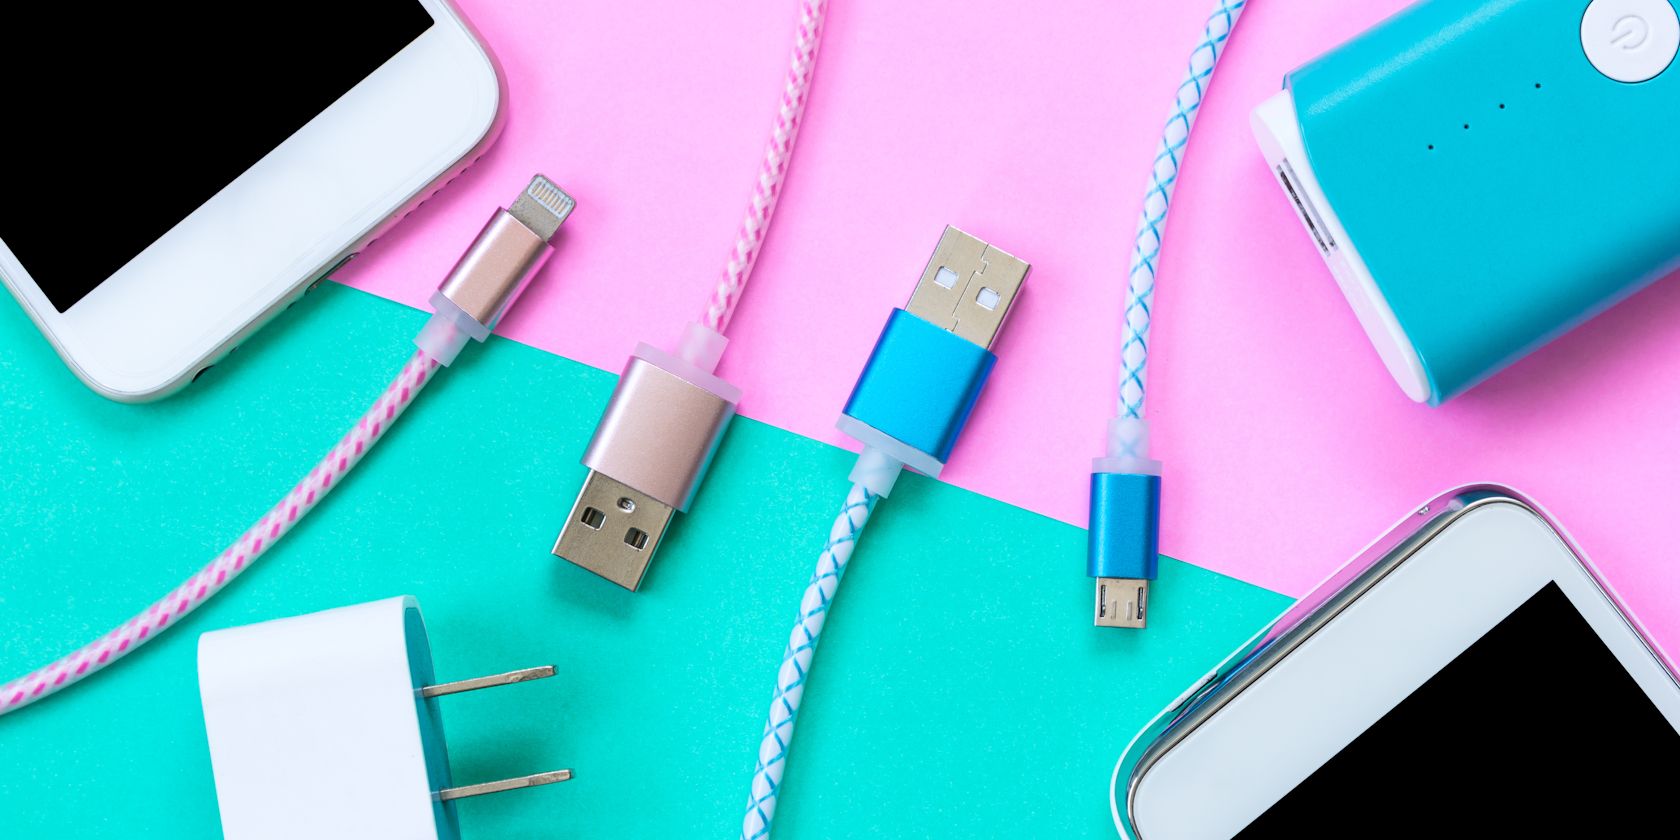 How Lengthy Can a USB Cable Be & What Is the Most USB Cable Size? | Digital Noch